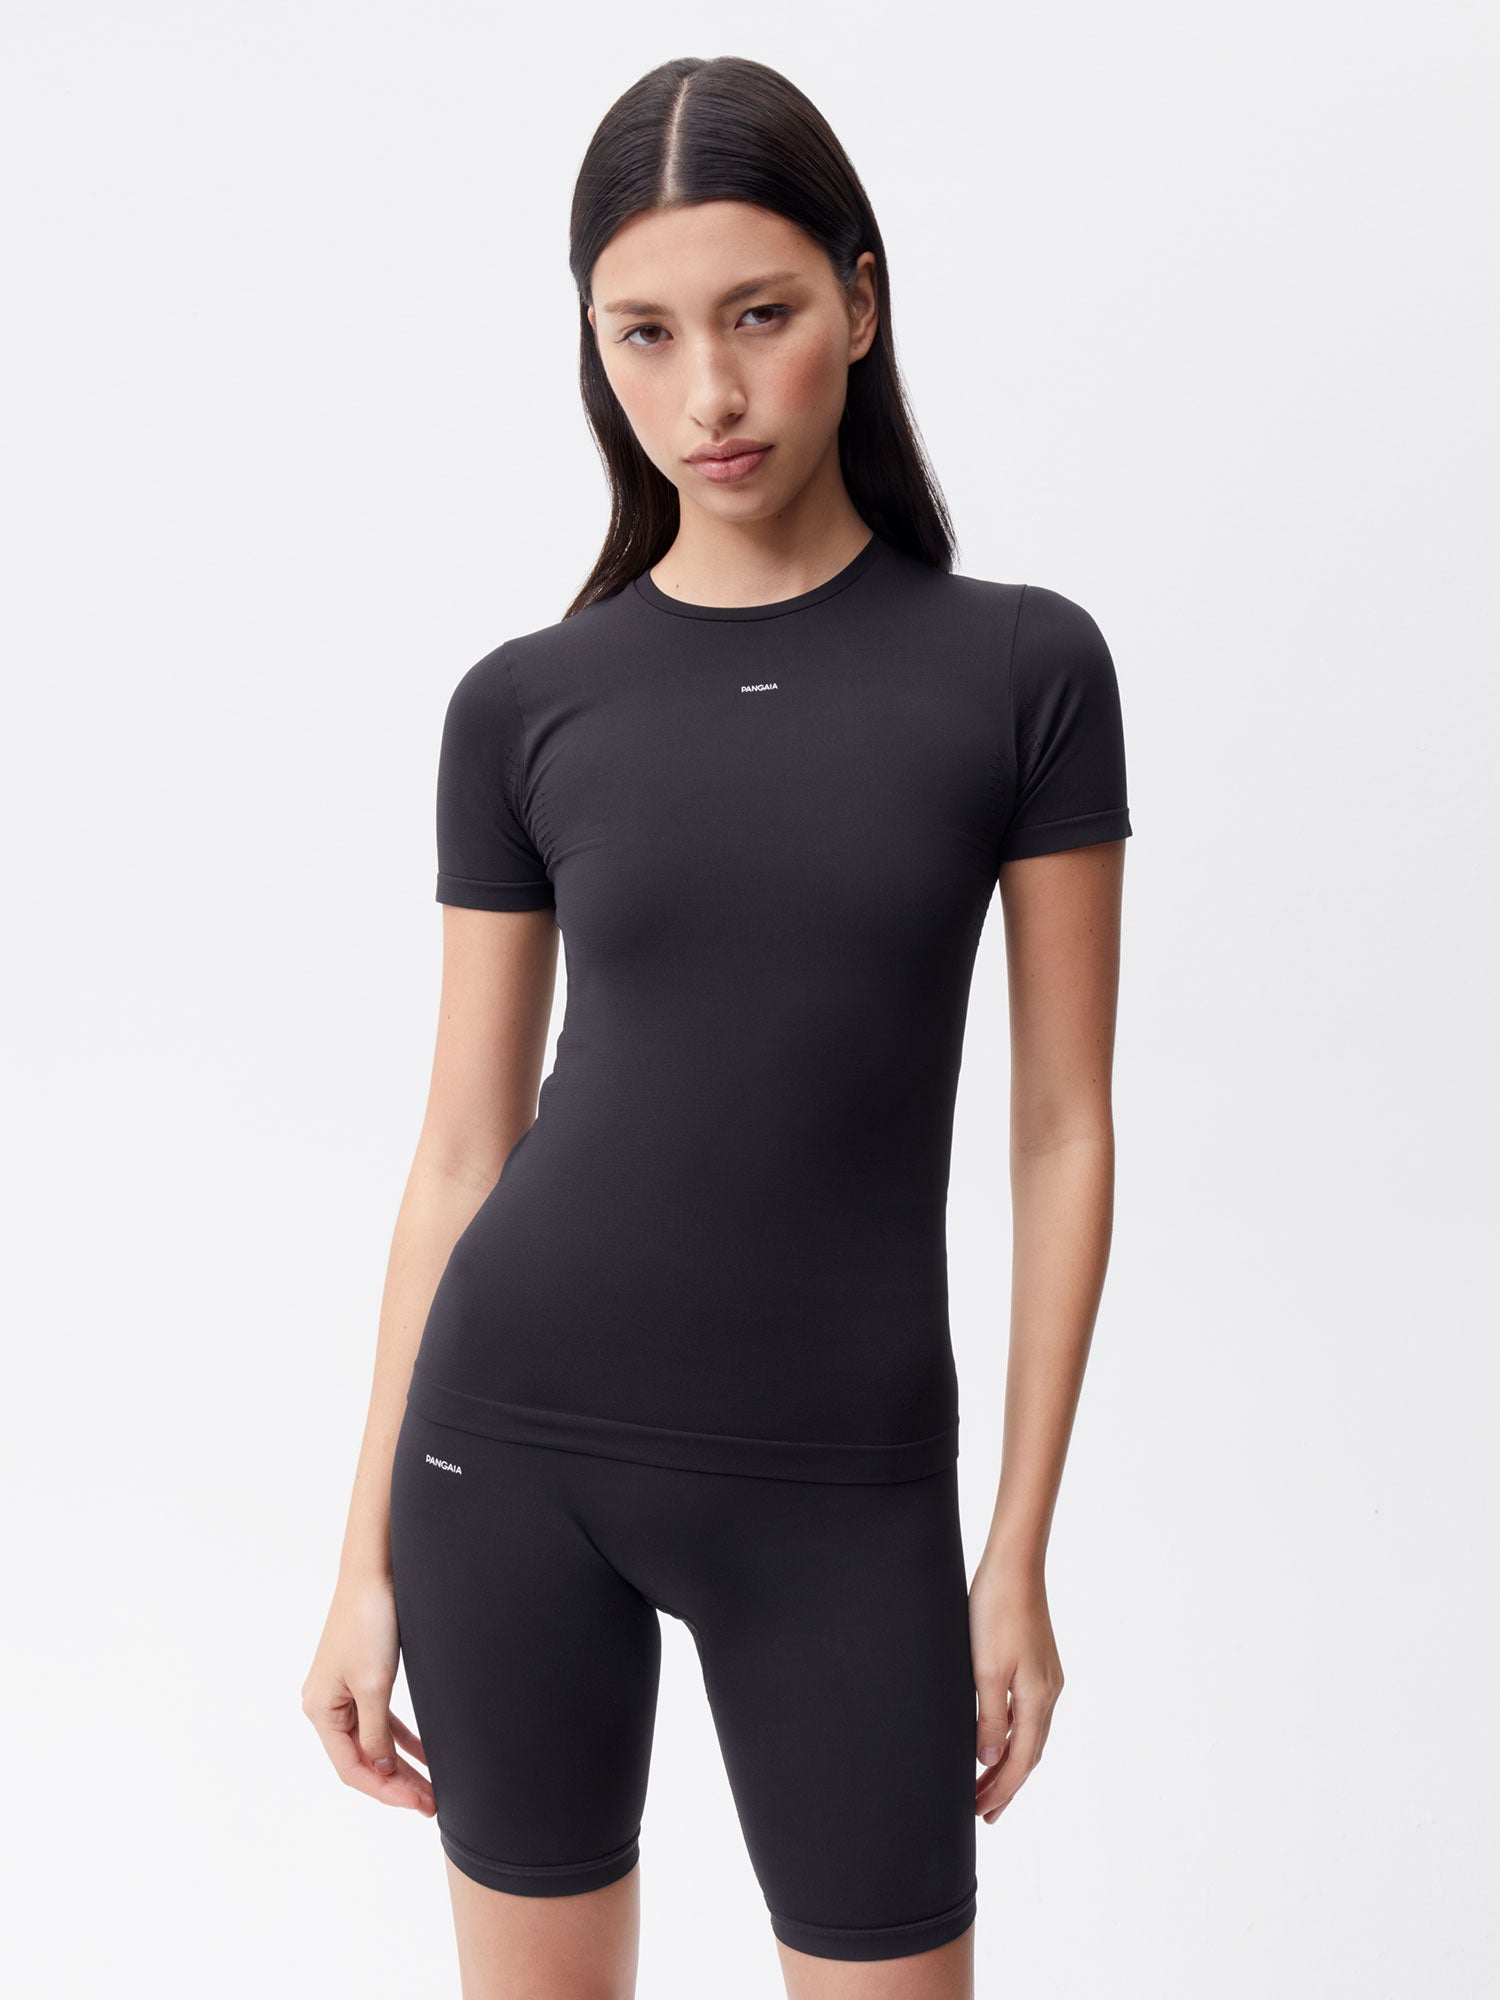 Out From Under Everyday Seamless Stretch Long-Sleeved Baby Tee